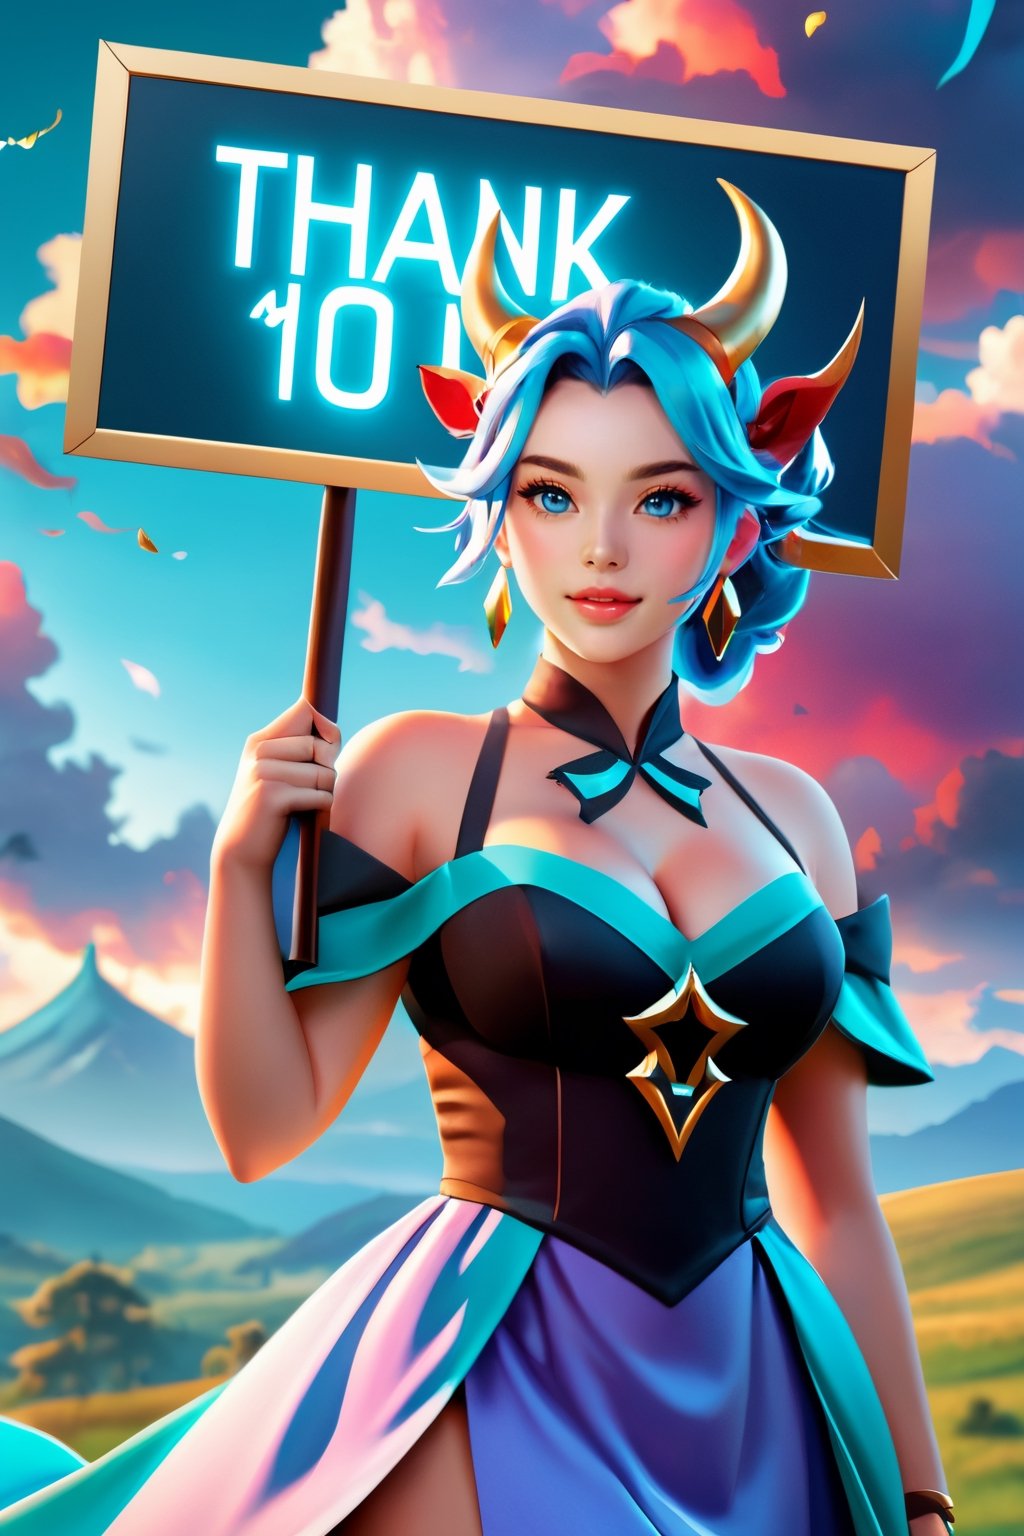 creates a high quality image, extreme details, ultra definition, extreme realism, 16k UHD,
Holding a sign text "Thank you 10K", a girl, big breasts, horns, teal hair, light blue eyes, genshin impact style dress, reddish sky, black clouds, diffuse light, mythological atmosphere,Text,text as "", 3D SINGLE TEXT,masterpiece